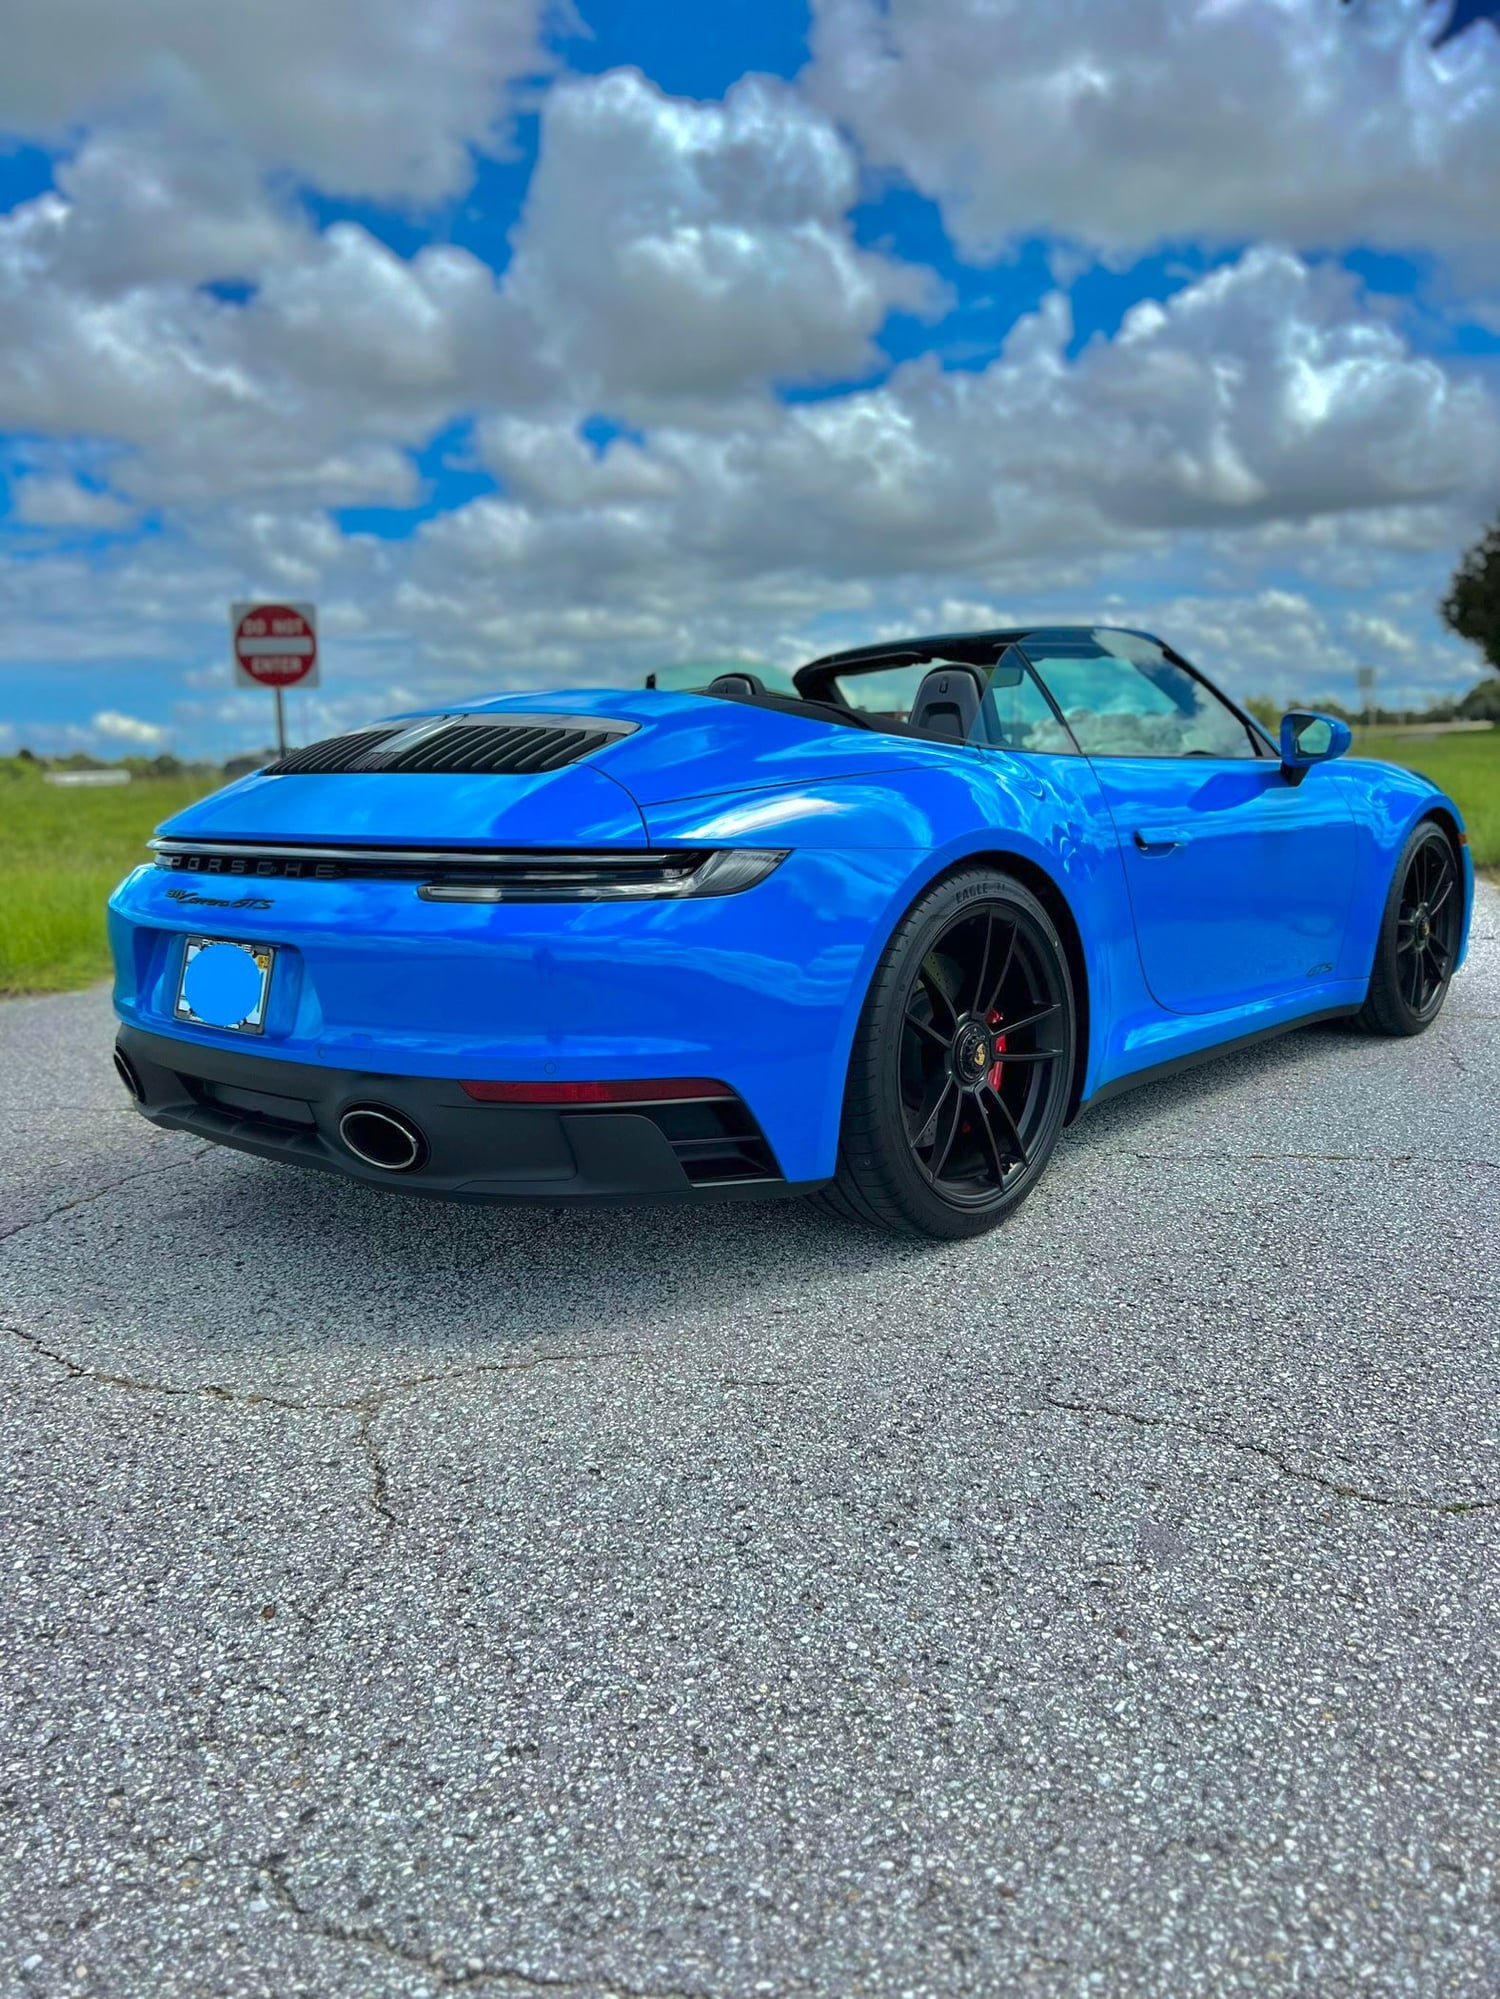 2022 Porsche 911 - 2022 911 GTS Cabriolet - Used - VIN WP0CB2A99NS244855 - 1,576 Miles - 2WD - Manual - Convertible - Blue - Orlando, FL 32801, United States